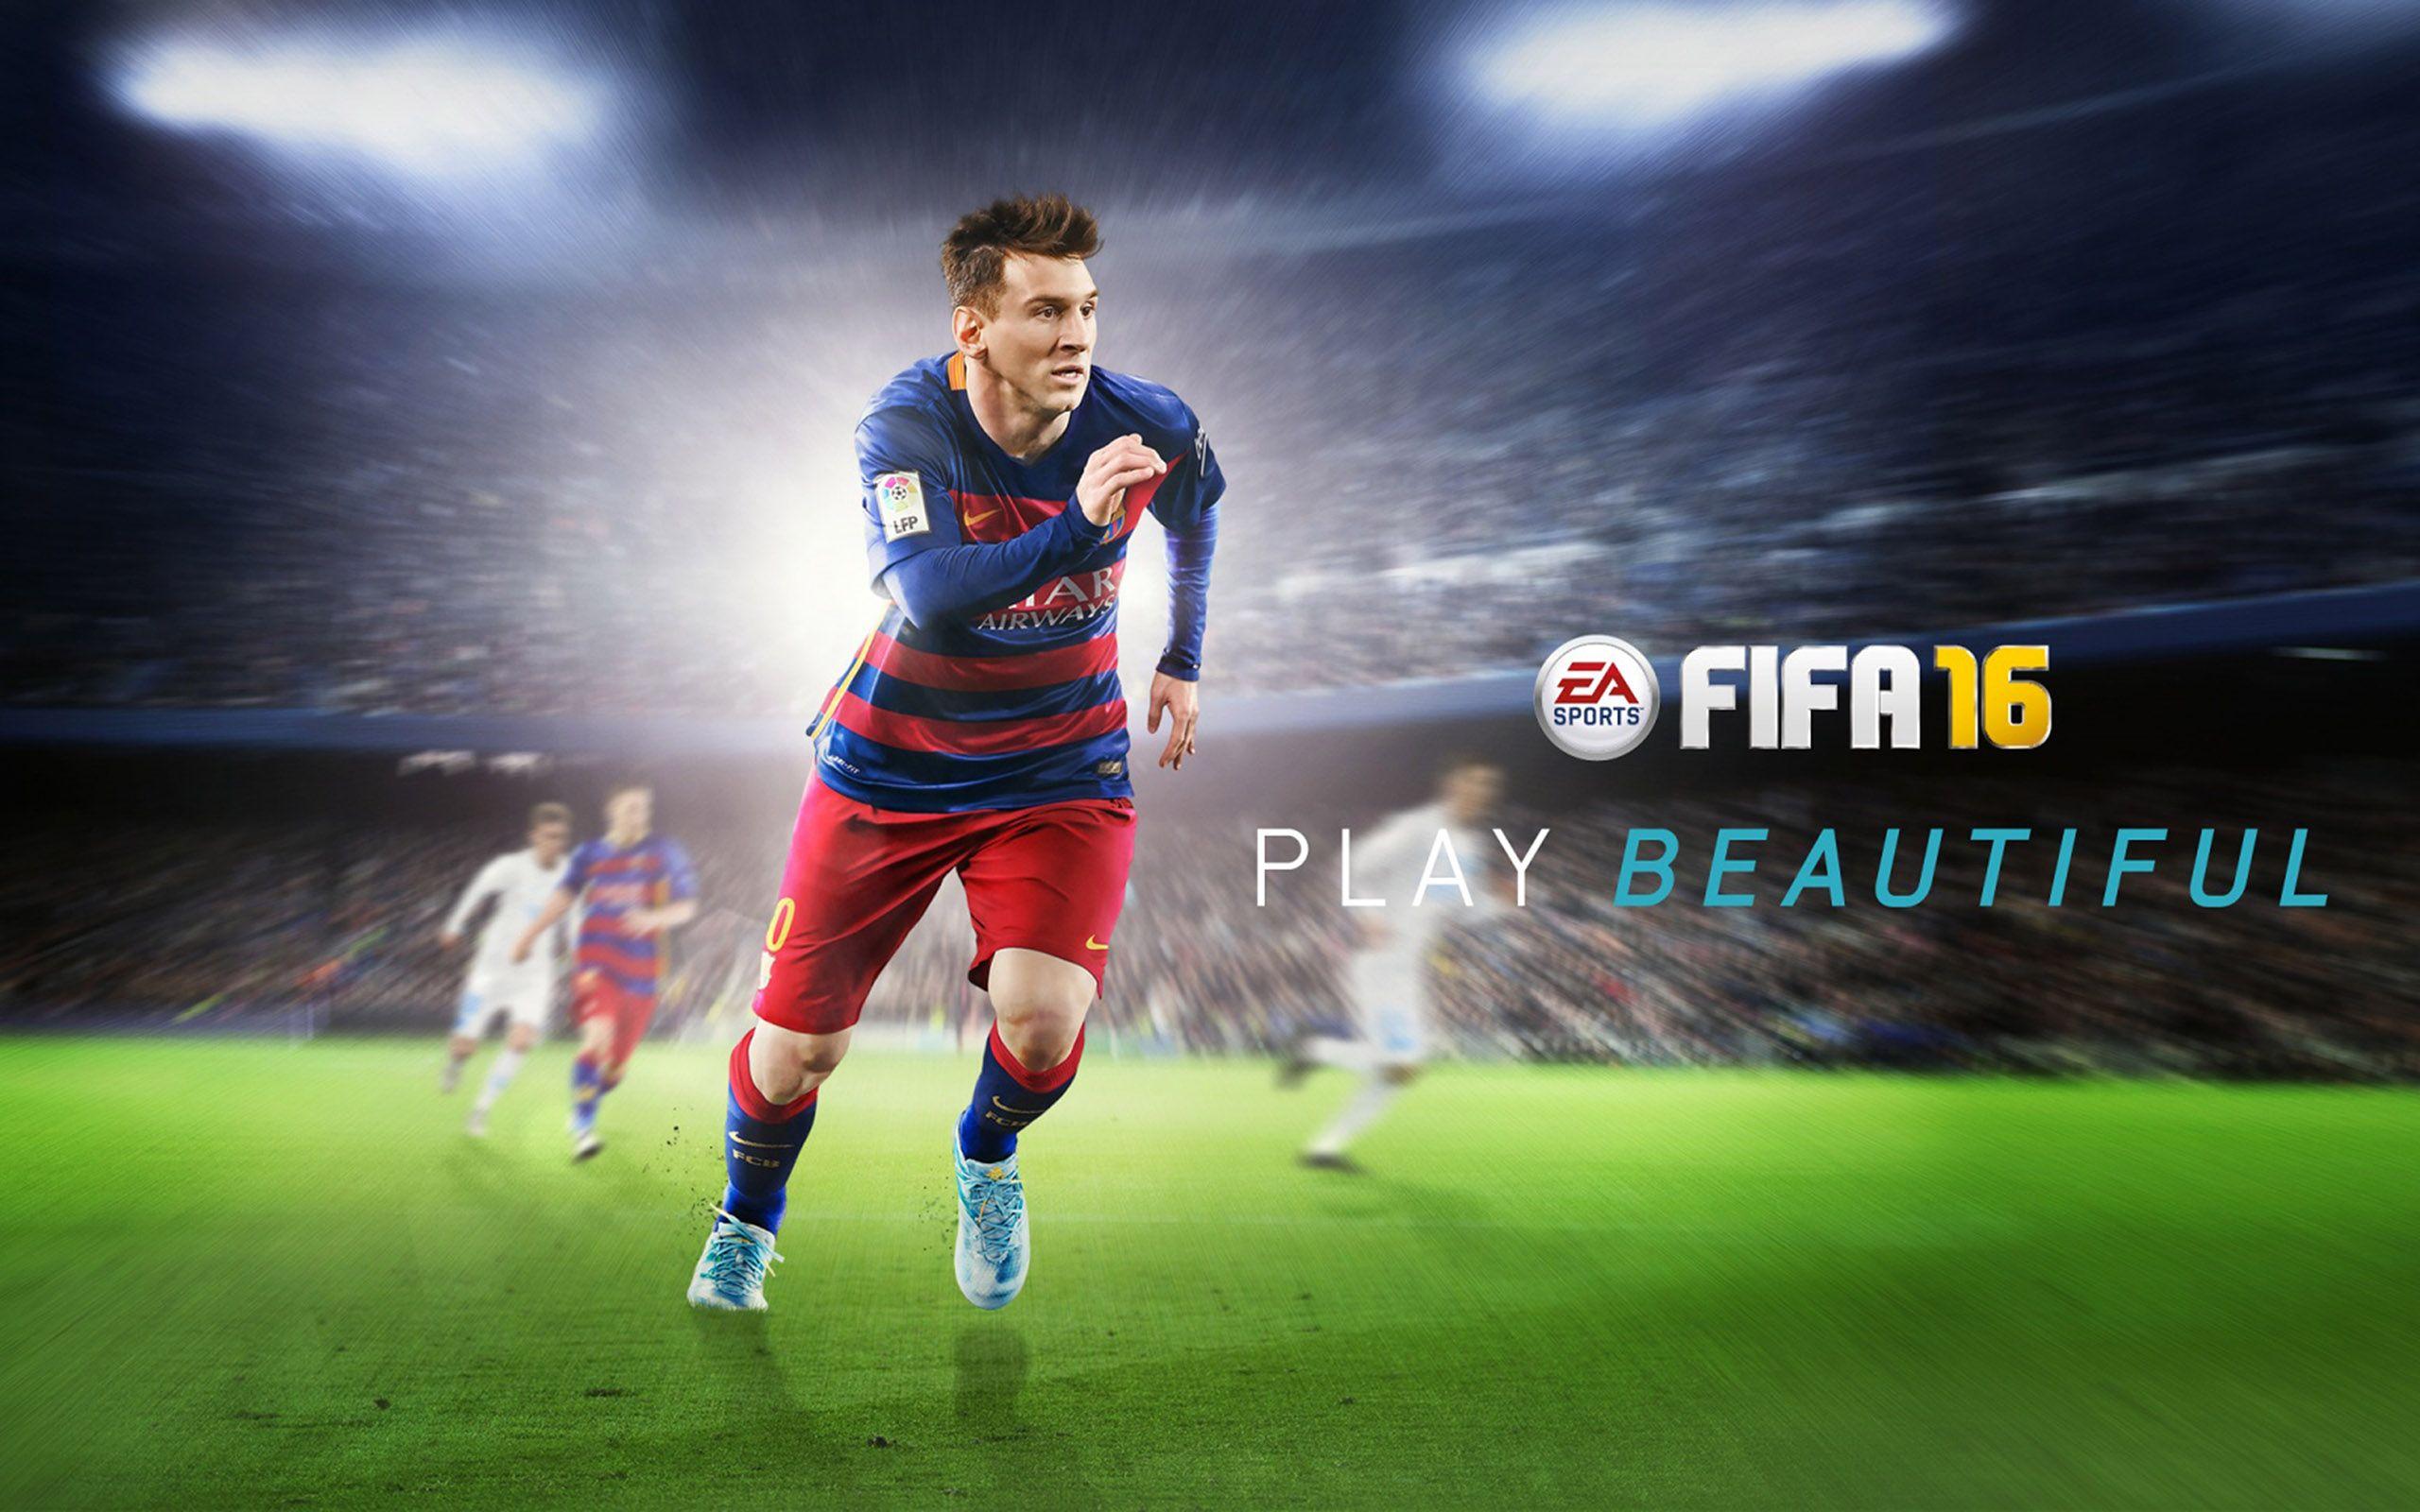 HD Background FIFA 16 Game Poster Lionel Messi Play Beautiful